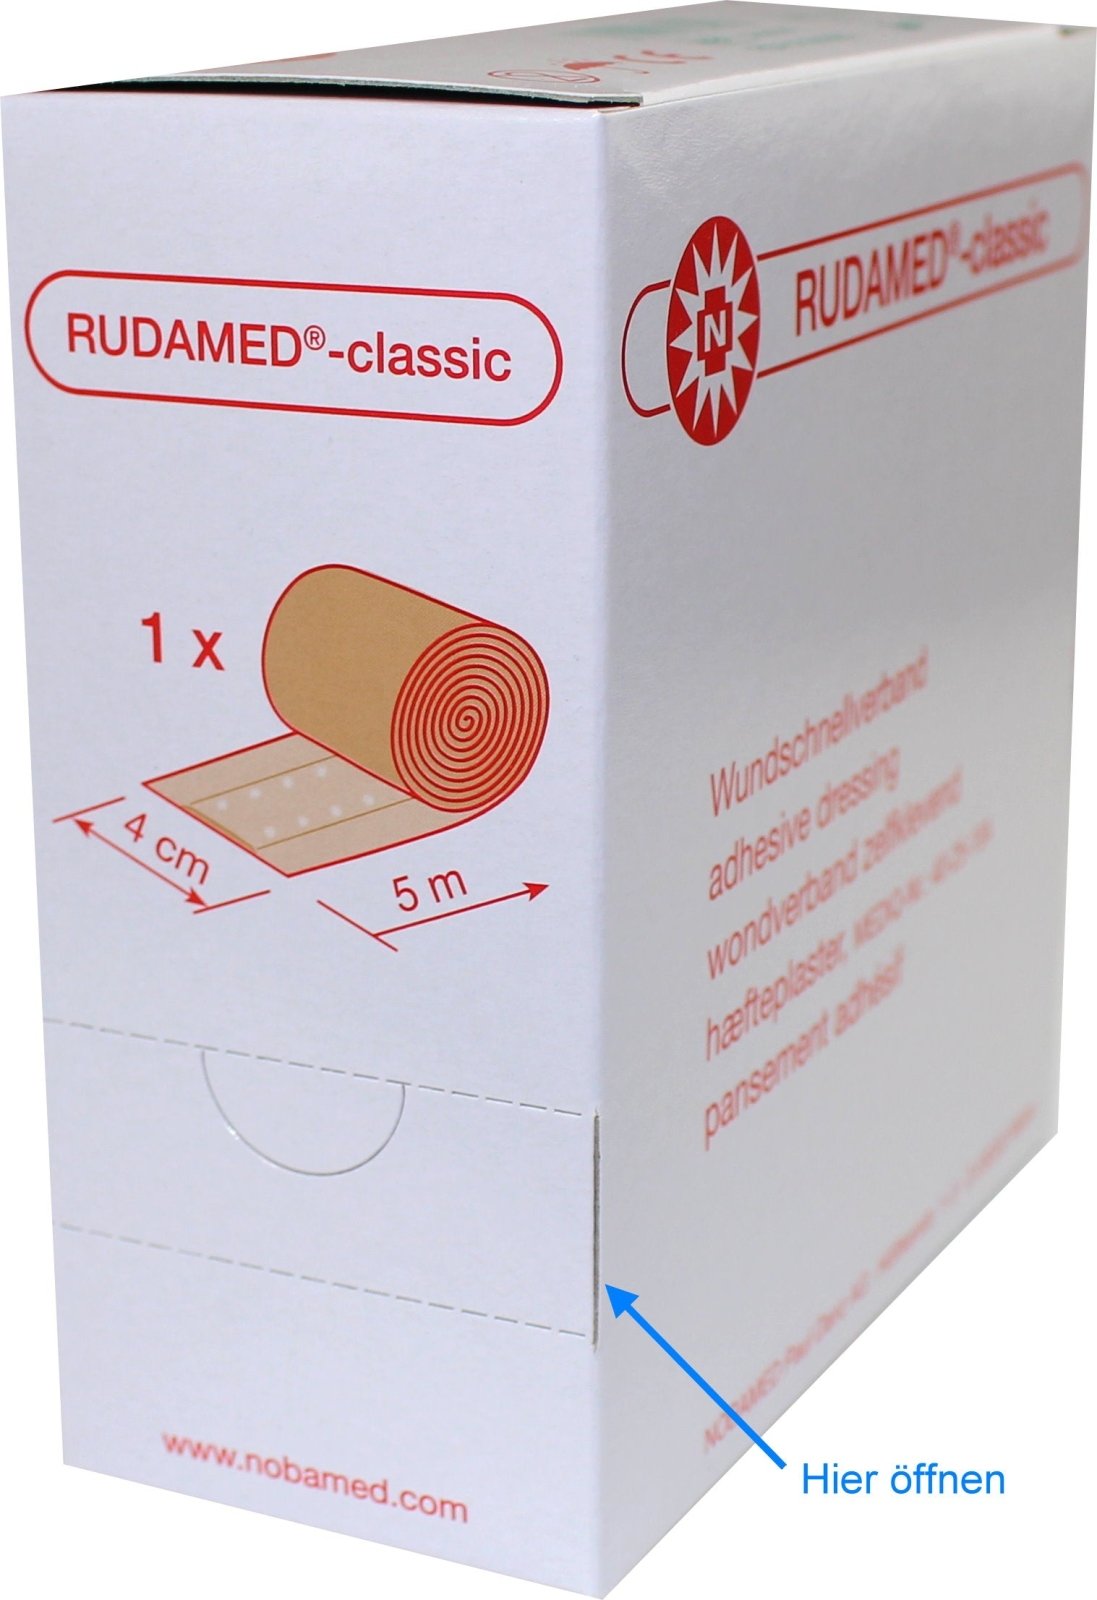 Noba Rudamed Classic Wundschnellverband